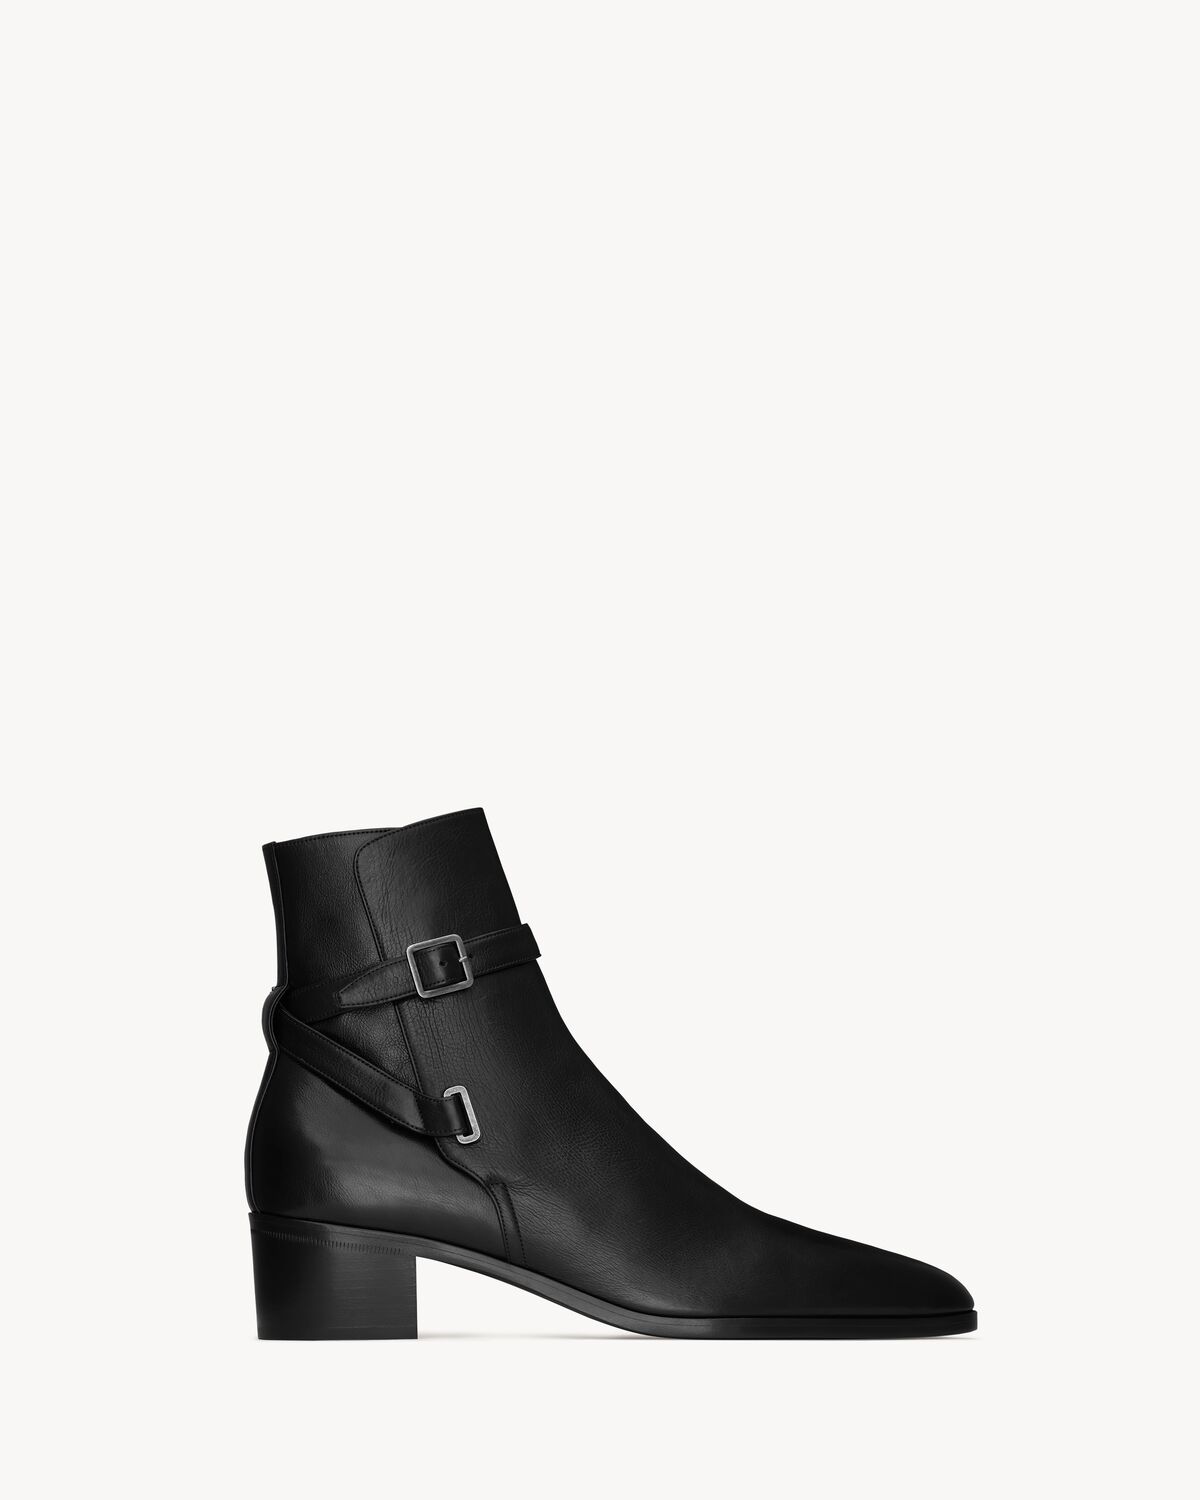 DORIAN jodhpur boots in smooth leather